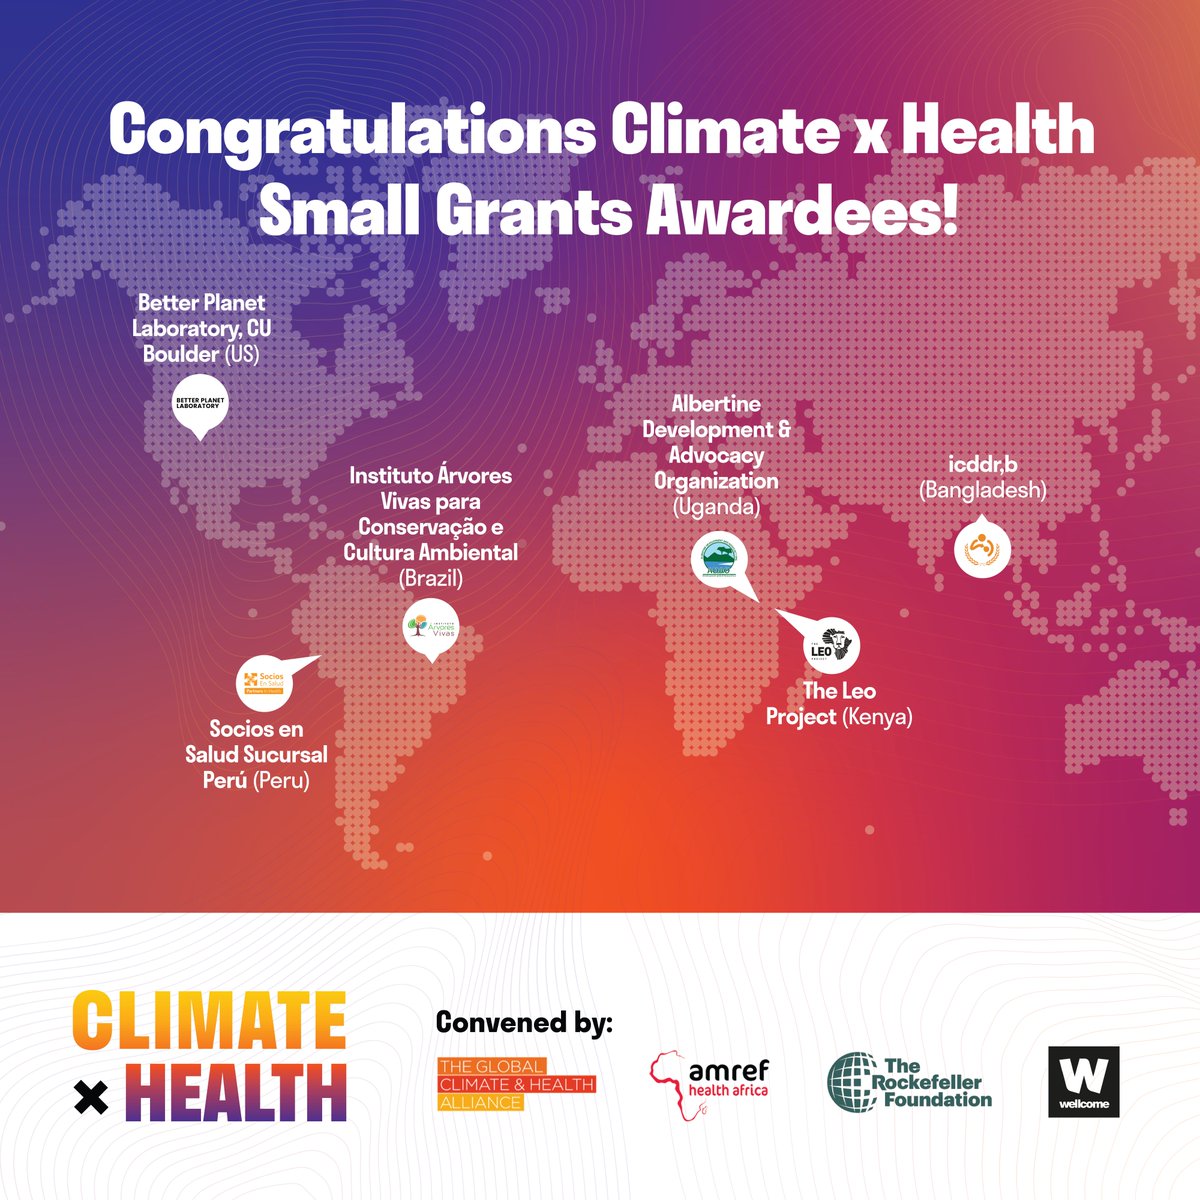 Congratulations to the six Climate x Health small grants awardees! From indigenous knowledge to mental health, these 6 organizations are working to address the most pressing issues at the nexus of climate and health. Learn more: climatexhealth.org/small-grants